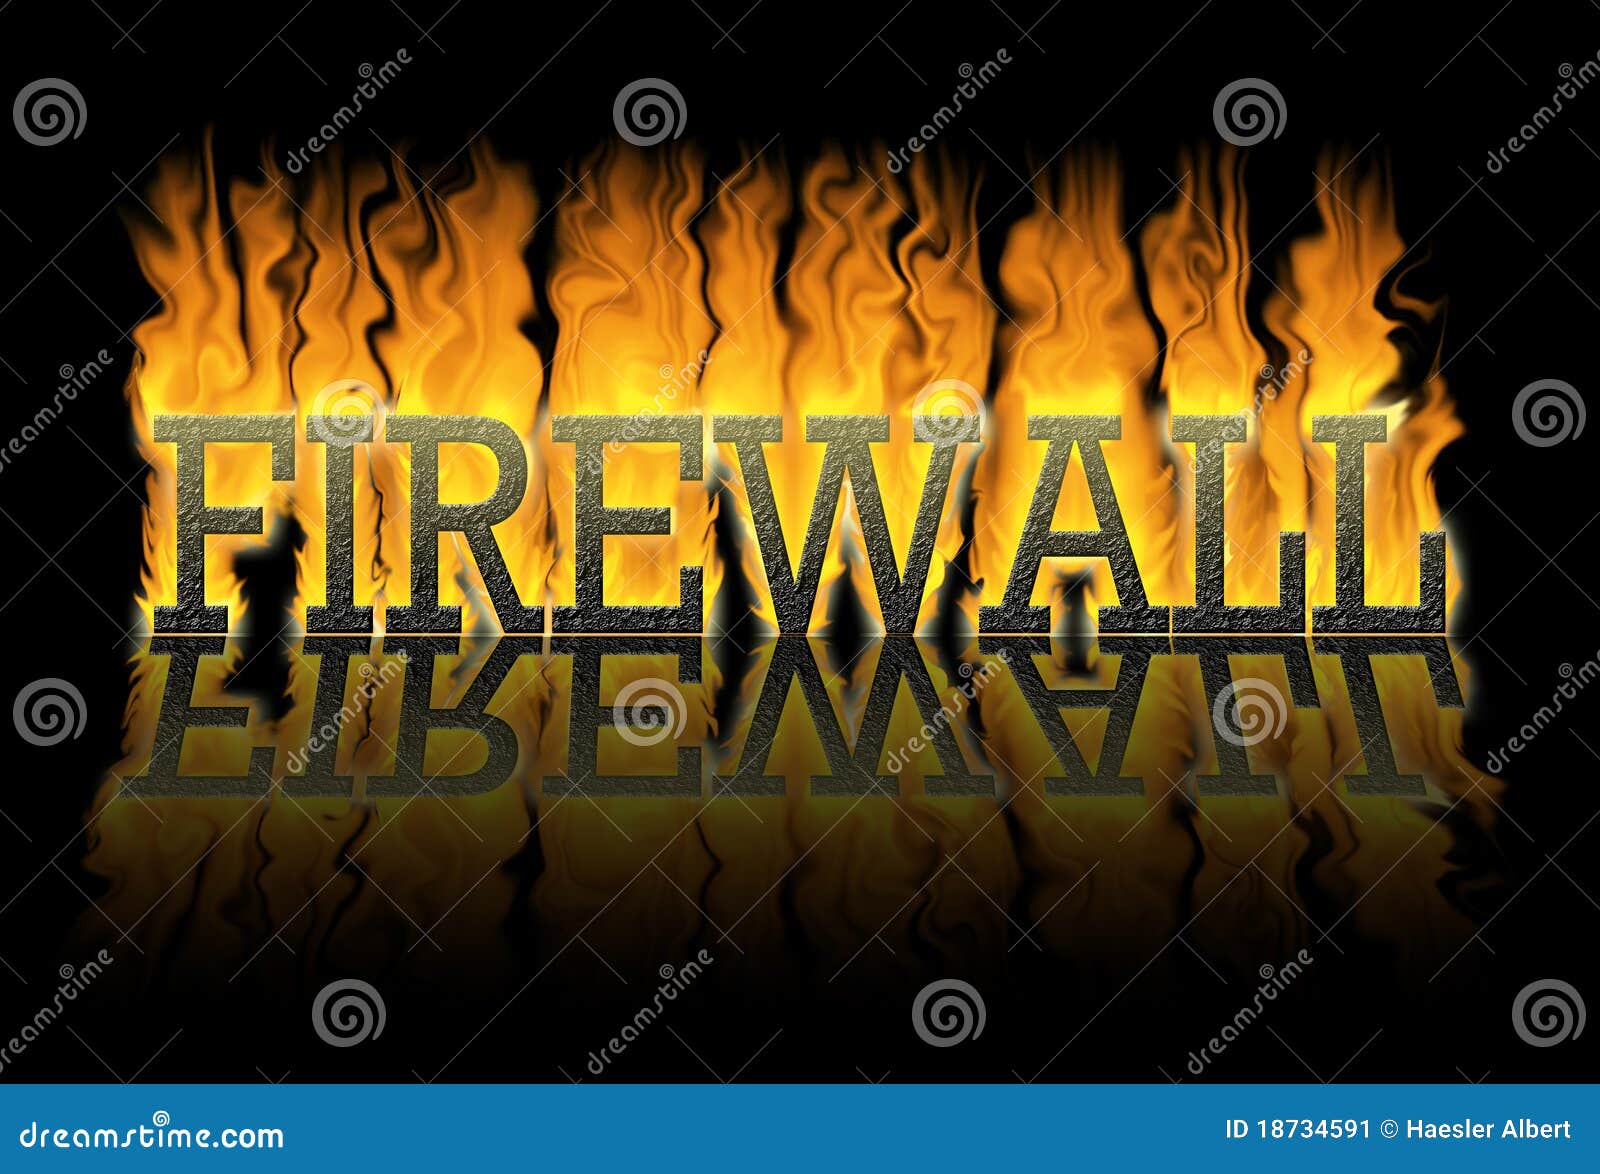 Image result for FIREWALL/WIKI